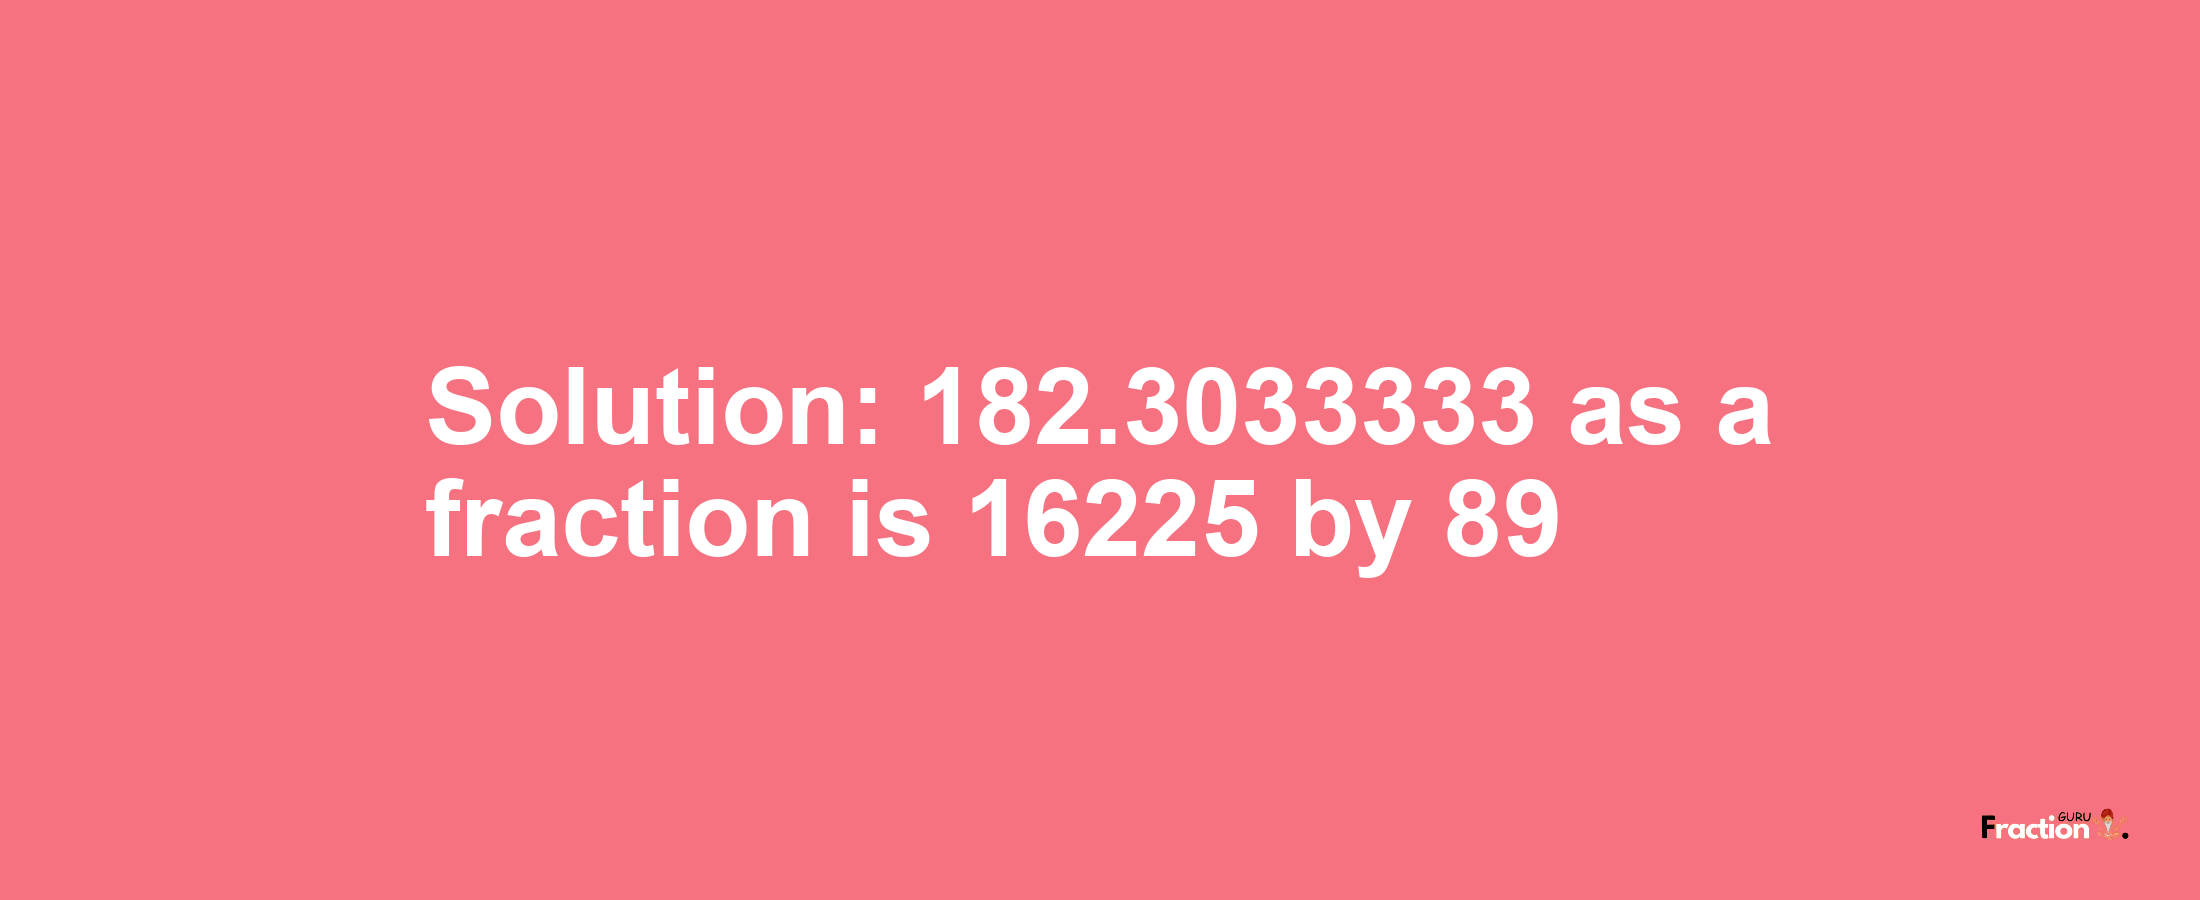 Solution:182.3033333 as a fraction is 16225/89